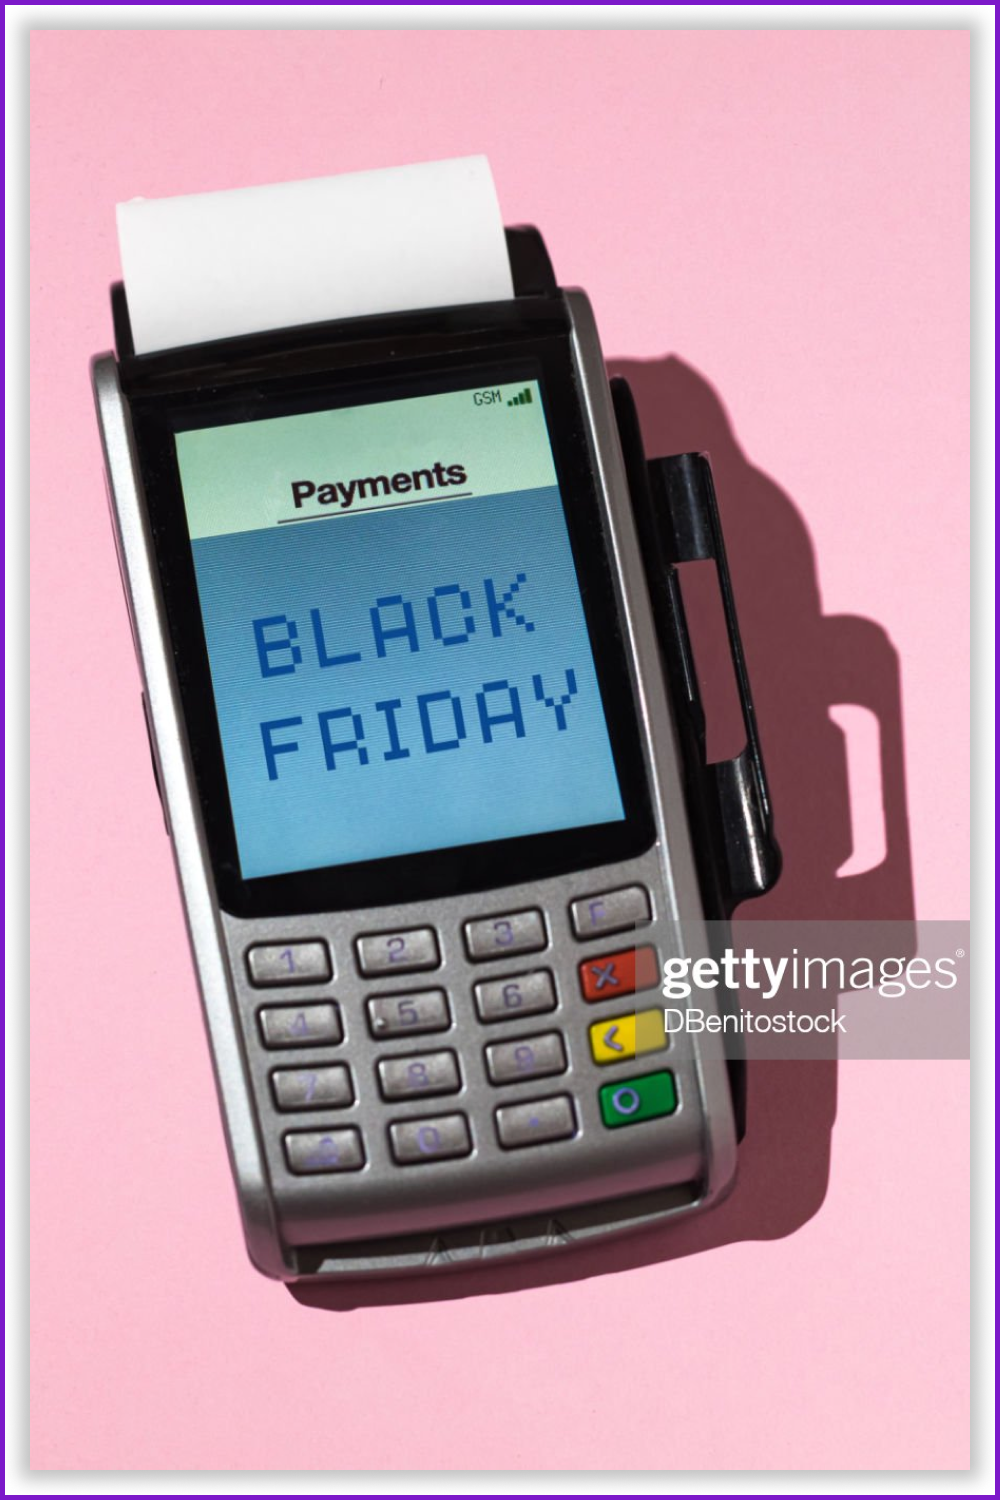 Dataphone with text on the screen “Black Friday” on the pink background.